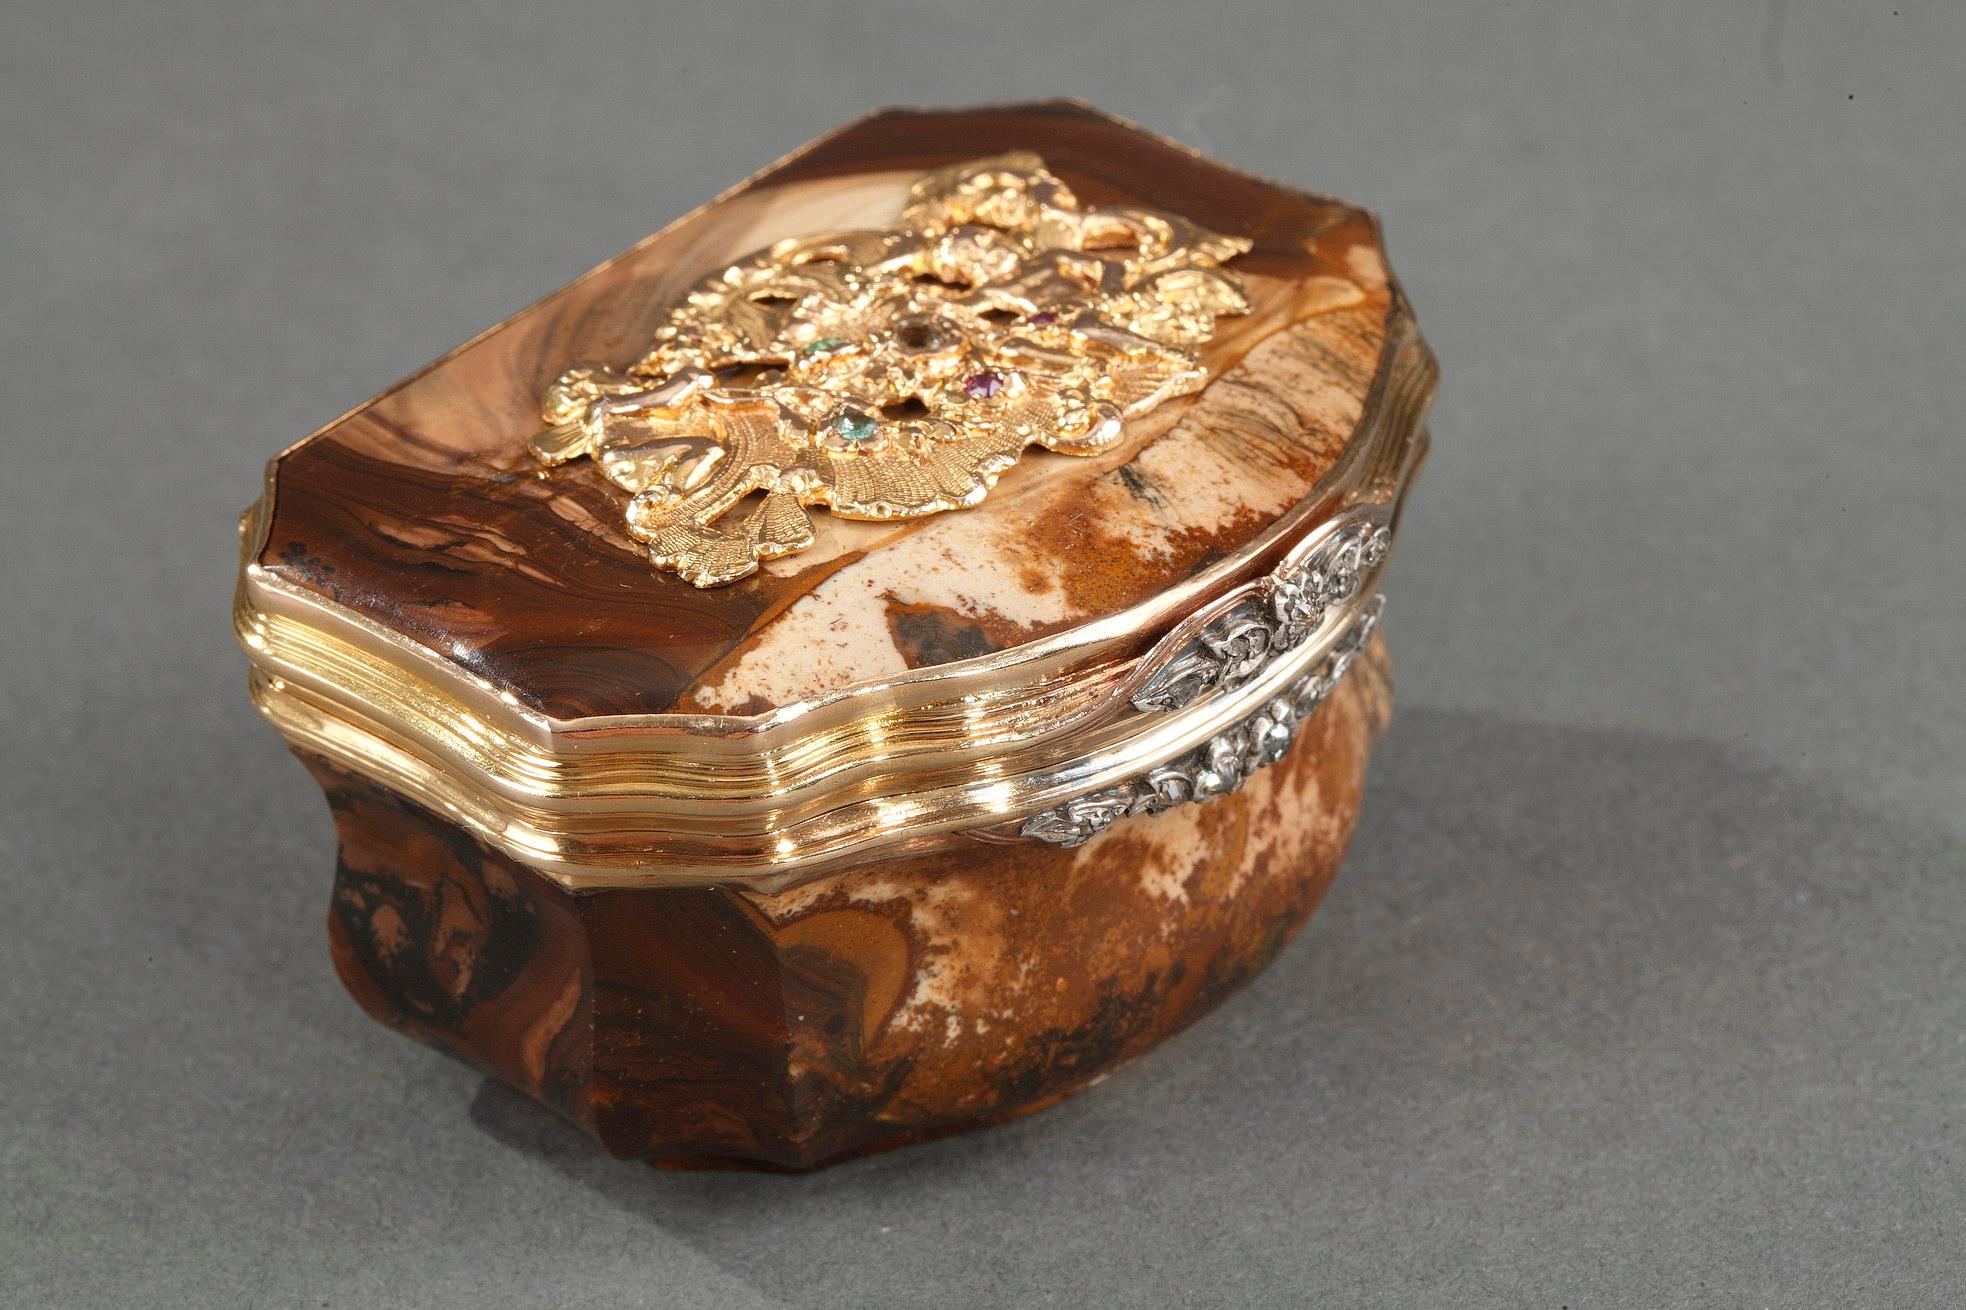 Agate snuffbox with gadrooned body and sculpted gold mountings. The sculpting of the brown agate is enriched by the nuances of the veins in the stone. The center of the hinged lid is decorated with an asymmetrical, openwork Rocaille motif. This